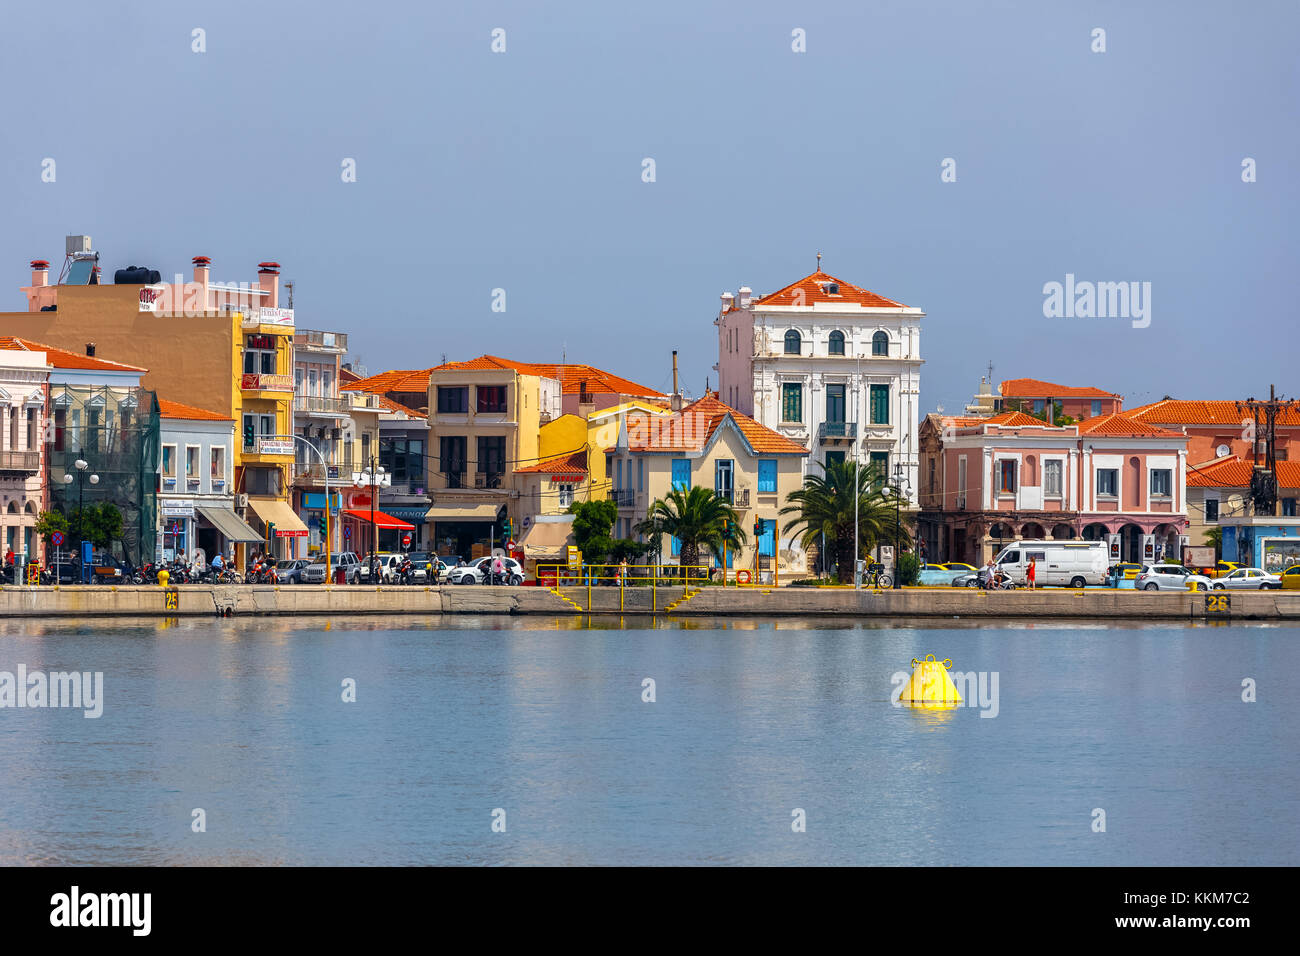 Panoramic shot of Mytilene town in Lesvos island, Greece.  Mitilene is the capital and port of the island of Lesbos and the North Aegean Region. Stock Photo